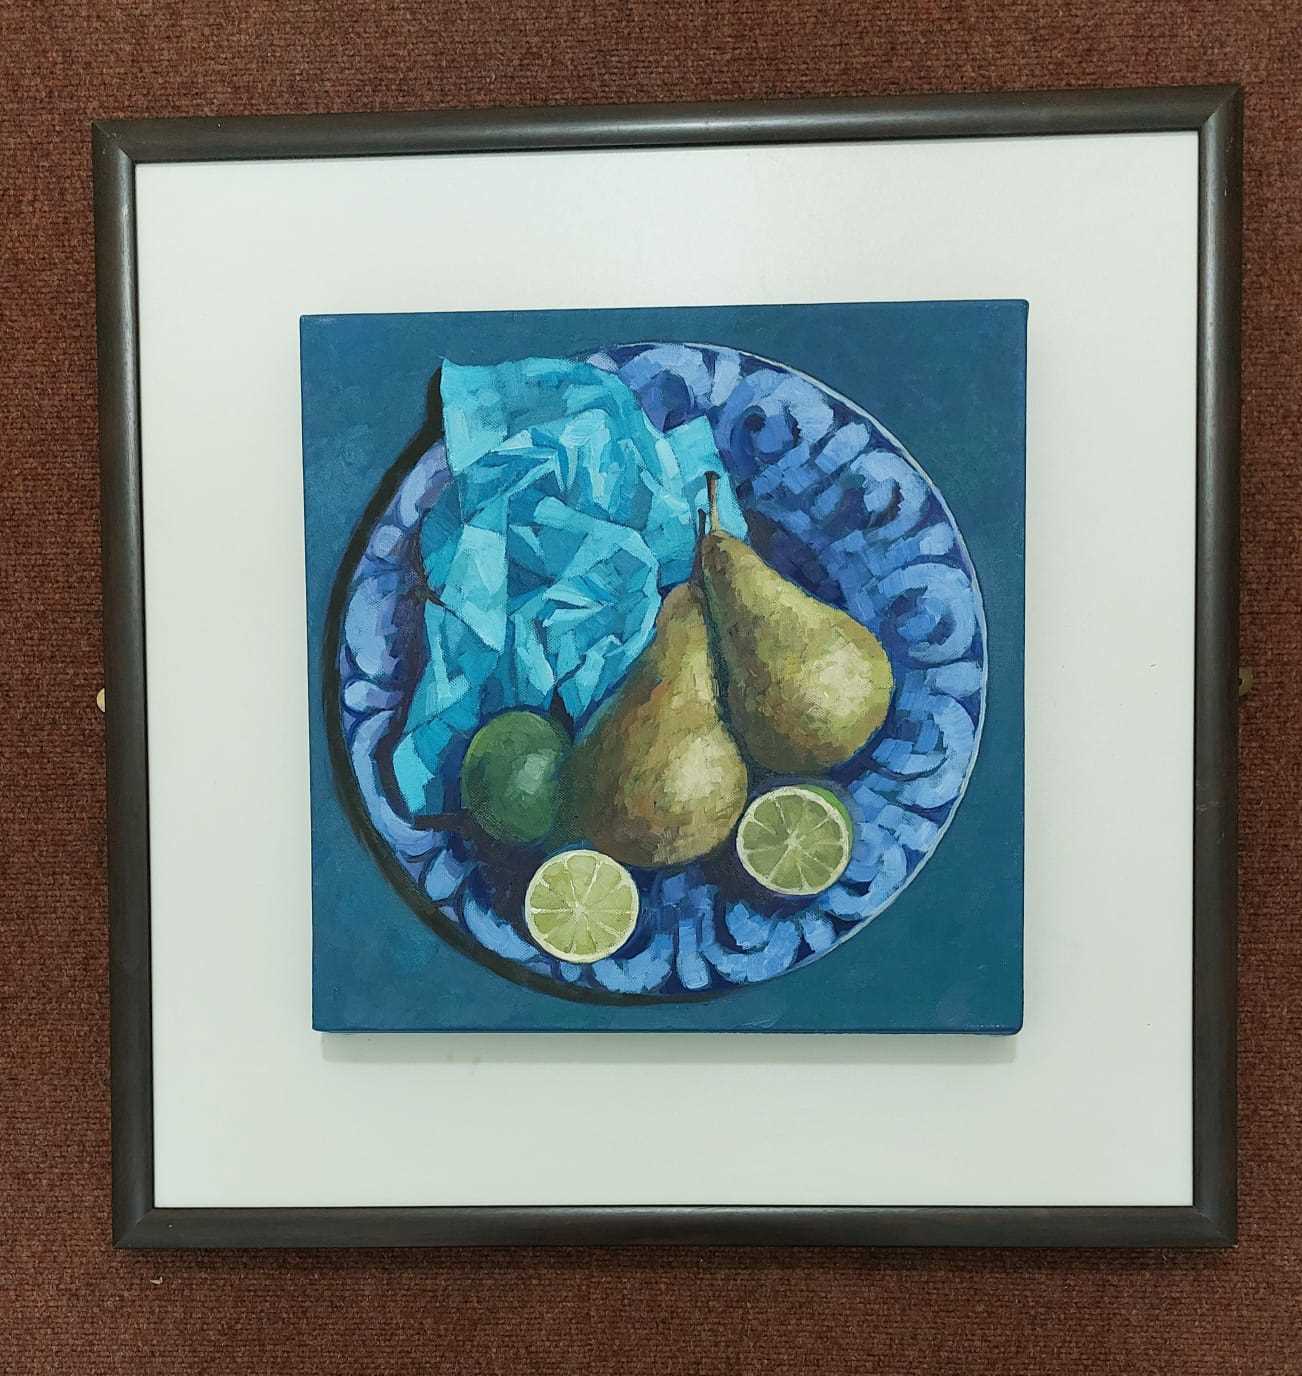 BRYN RICHARDS oil on canvas - Pears, limes, 40 x 40cms - Image 2 of 3